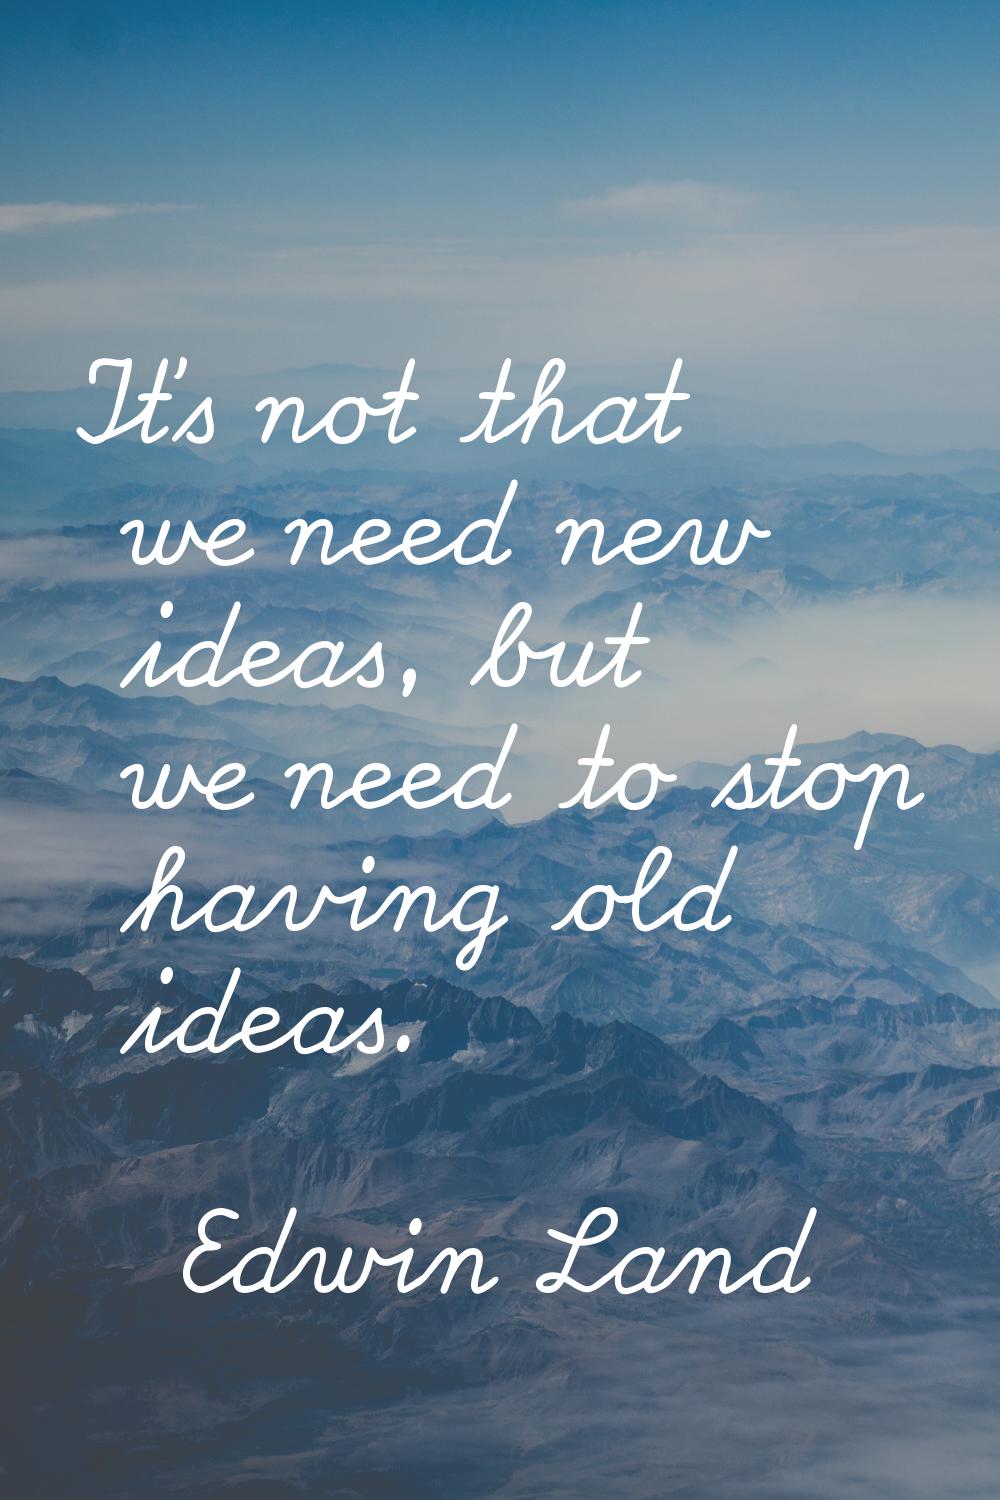 It's not that we need new ideas, but we need to stop having old ideas.